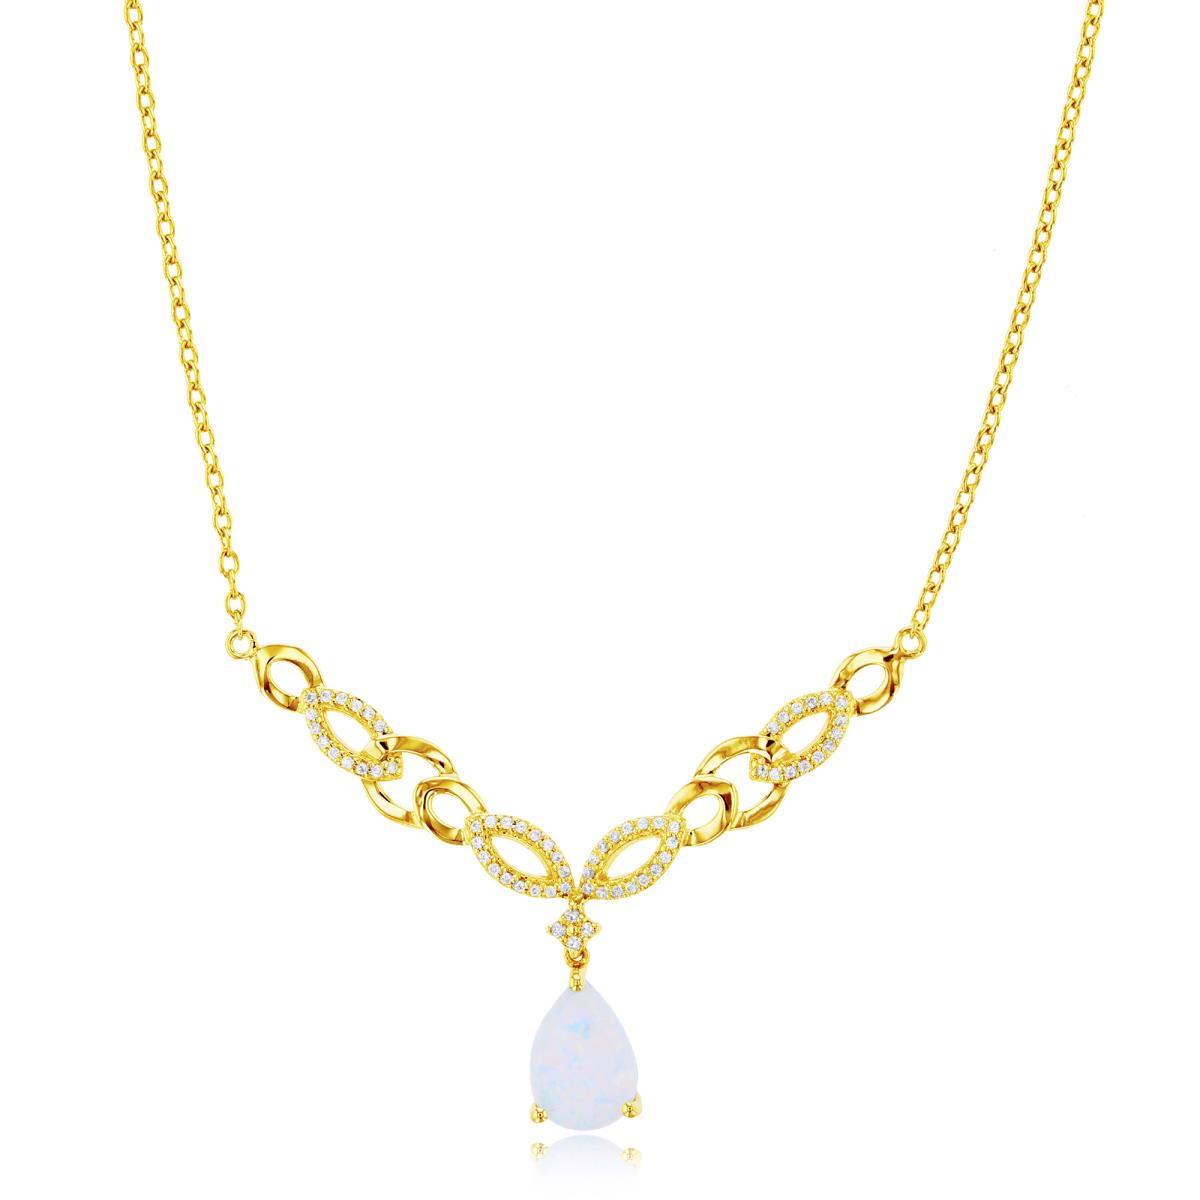 14K Yellow Gold 0.07 CTTW Diamonds & 10x7mm PS Opal Dangling 18" Y-Necklace